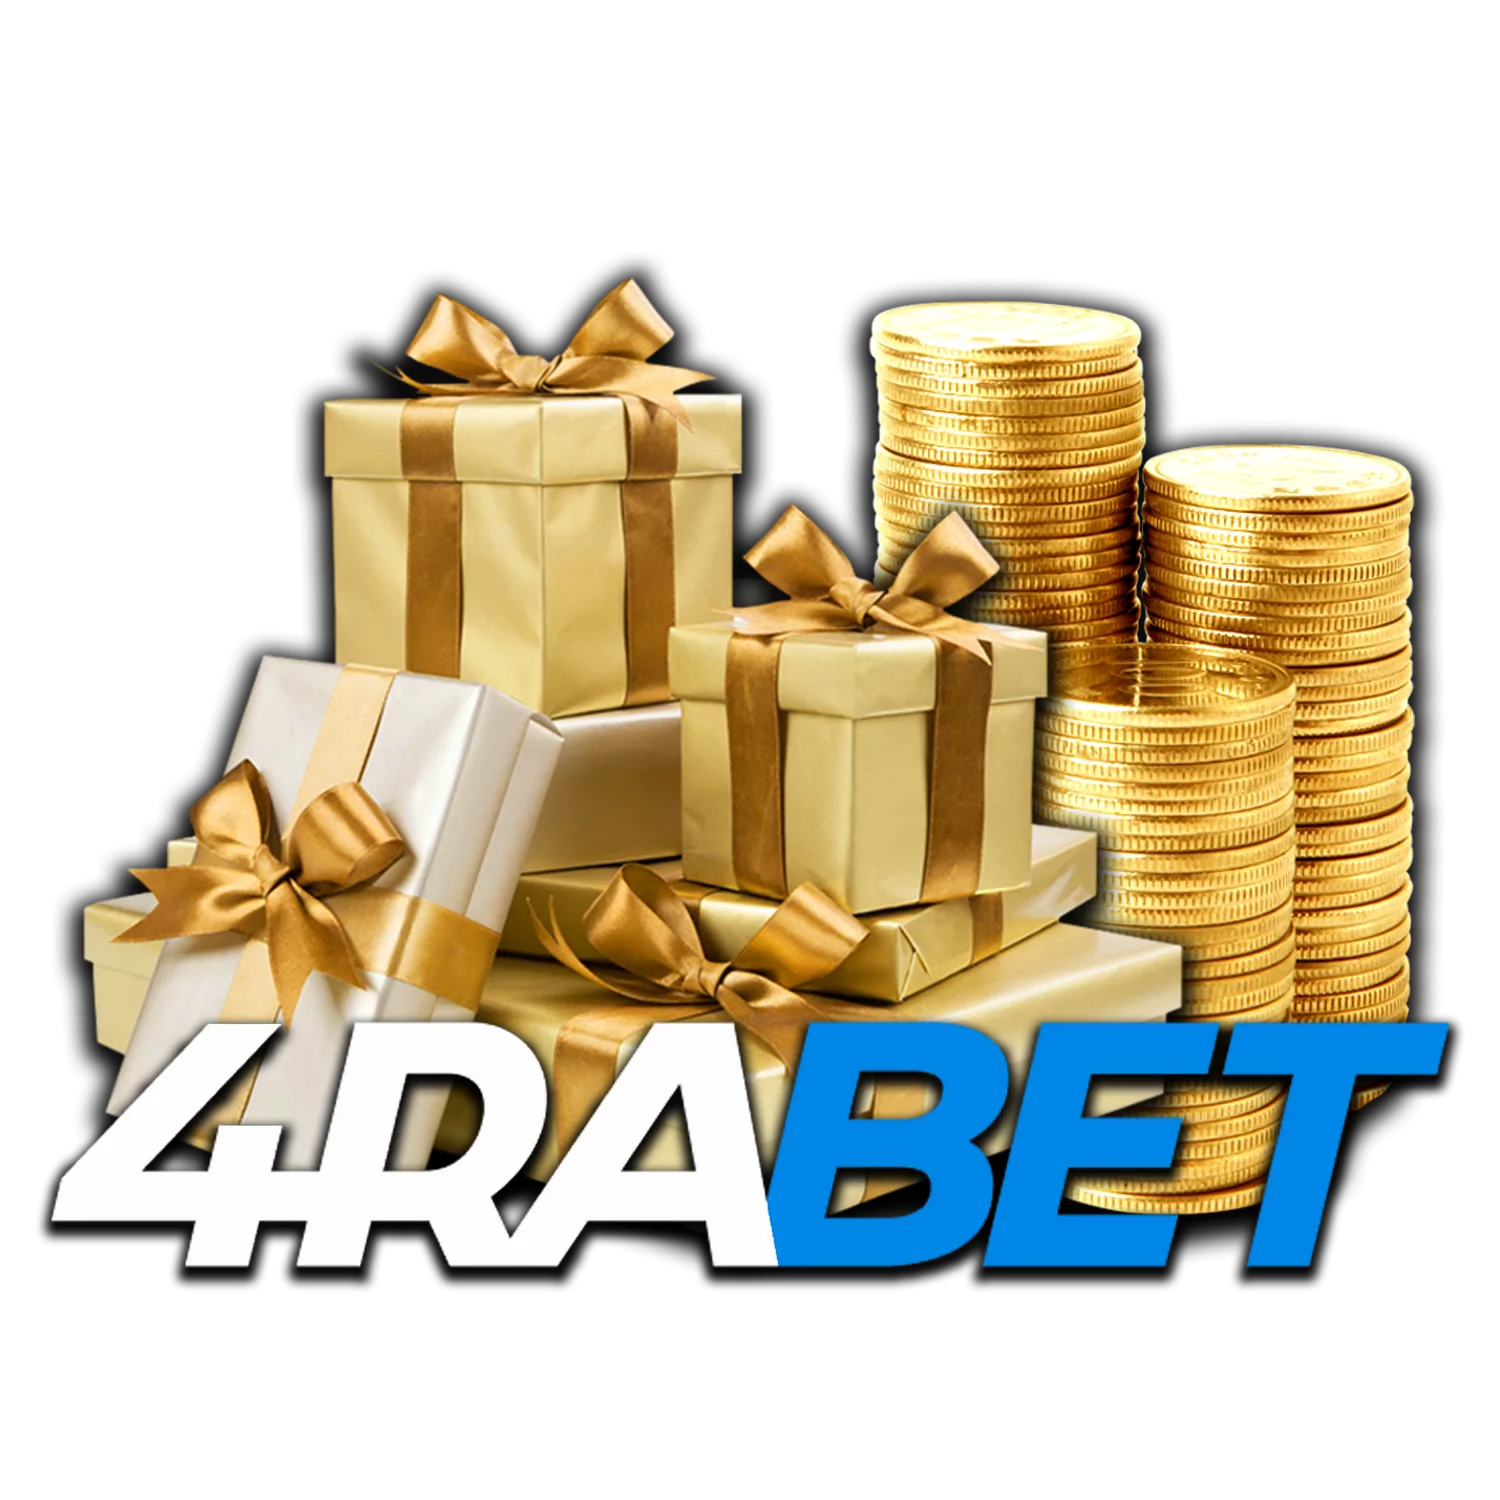 Promotions, bonuses and loyalty programs at 4rabet for new and regular players.